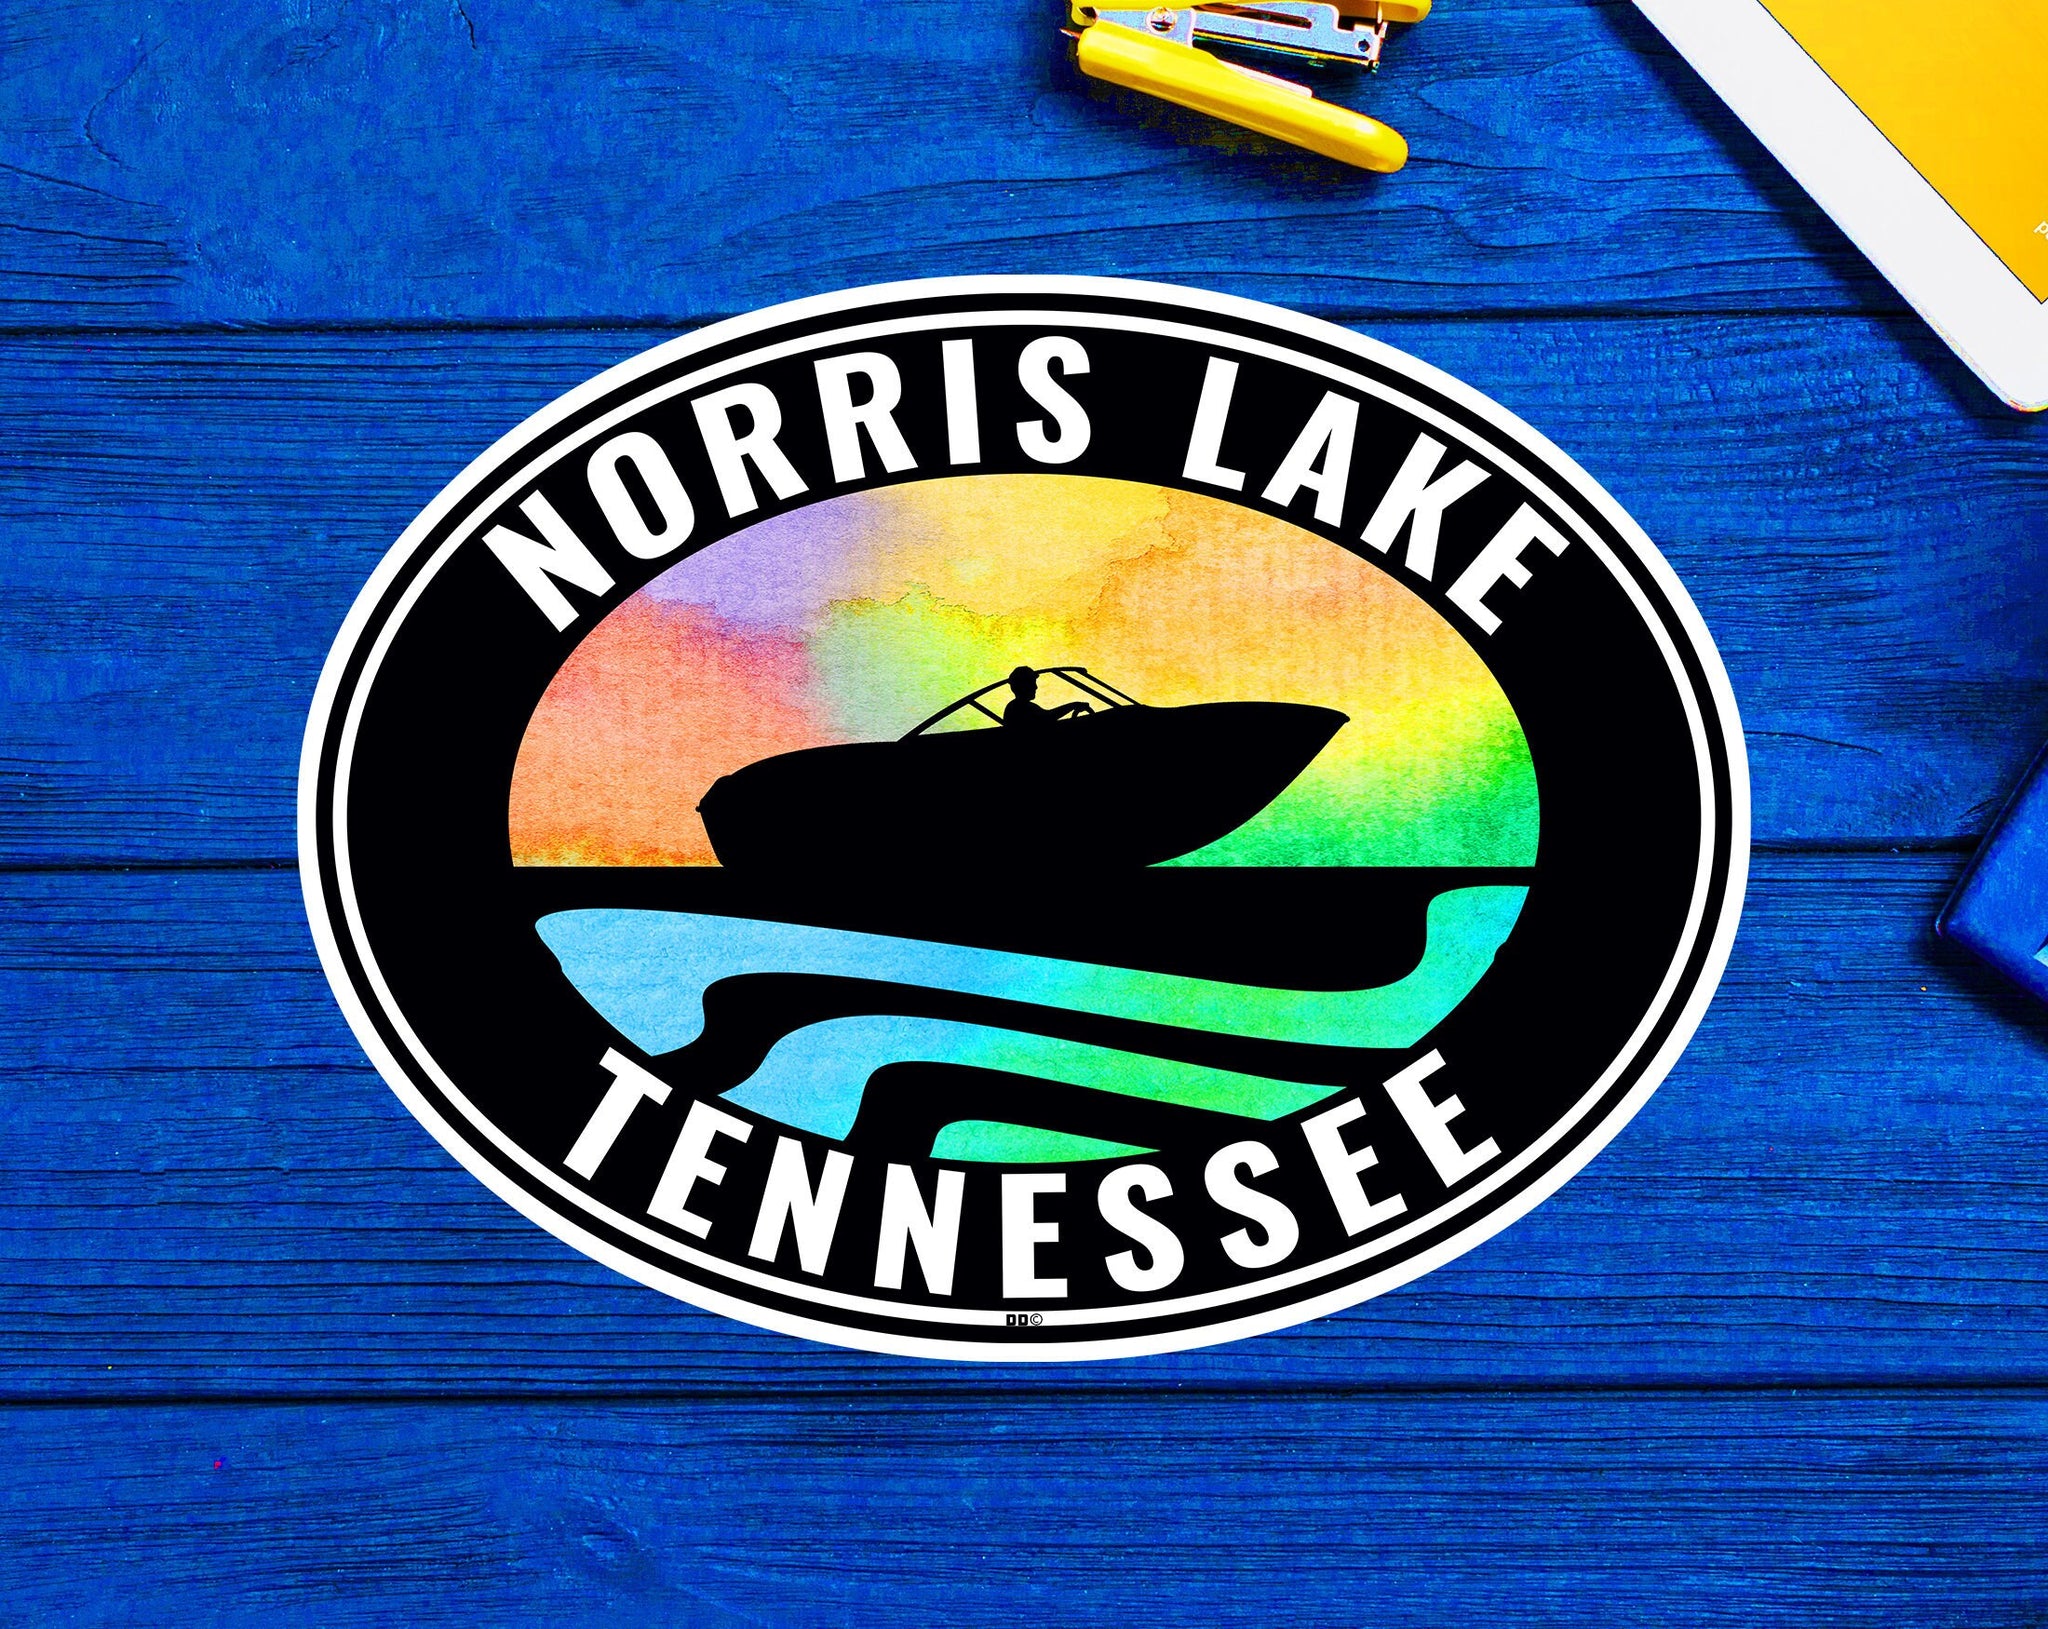 Norris Lake Tennessee Vintage Travel Sticker Decal 3.75" x 2.8" Laptop Bumper